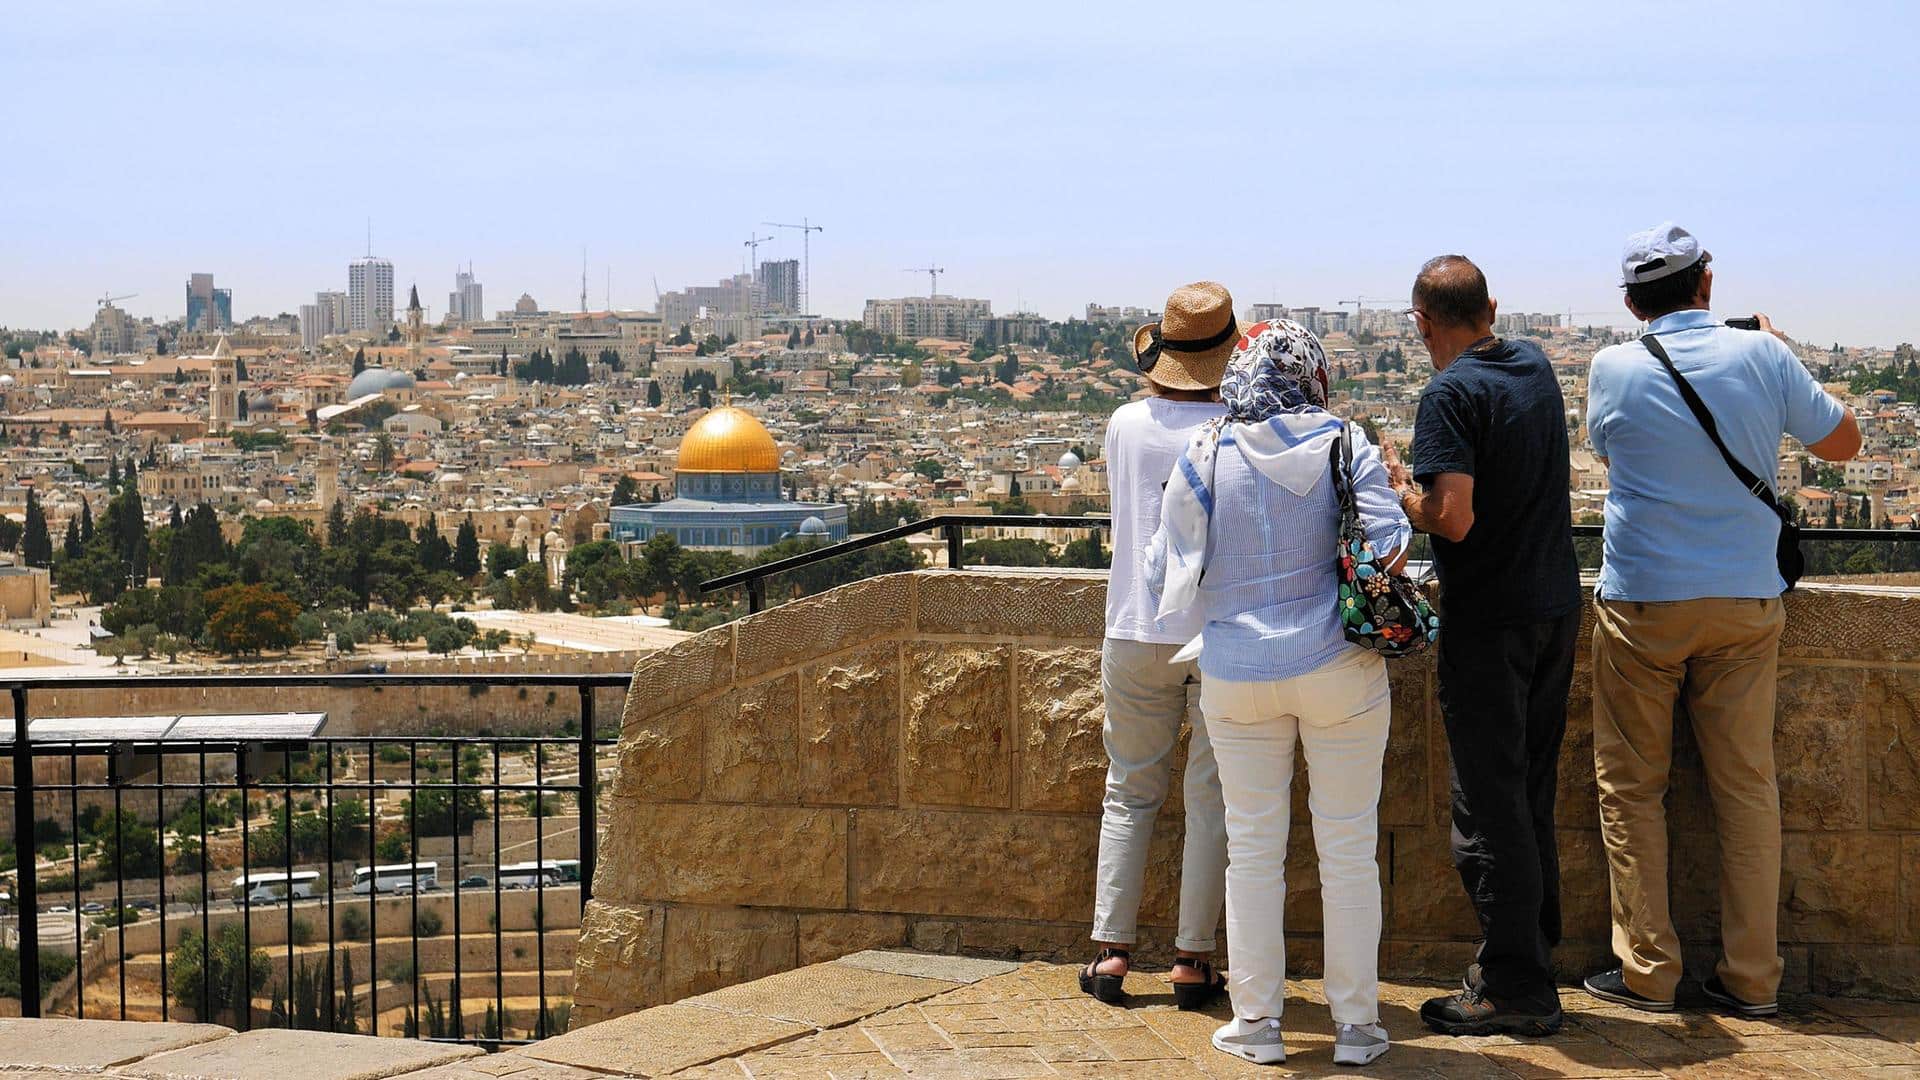 Things you should never do when in Israel